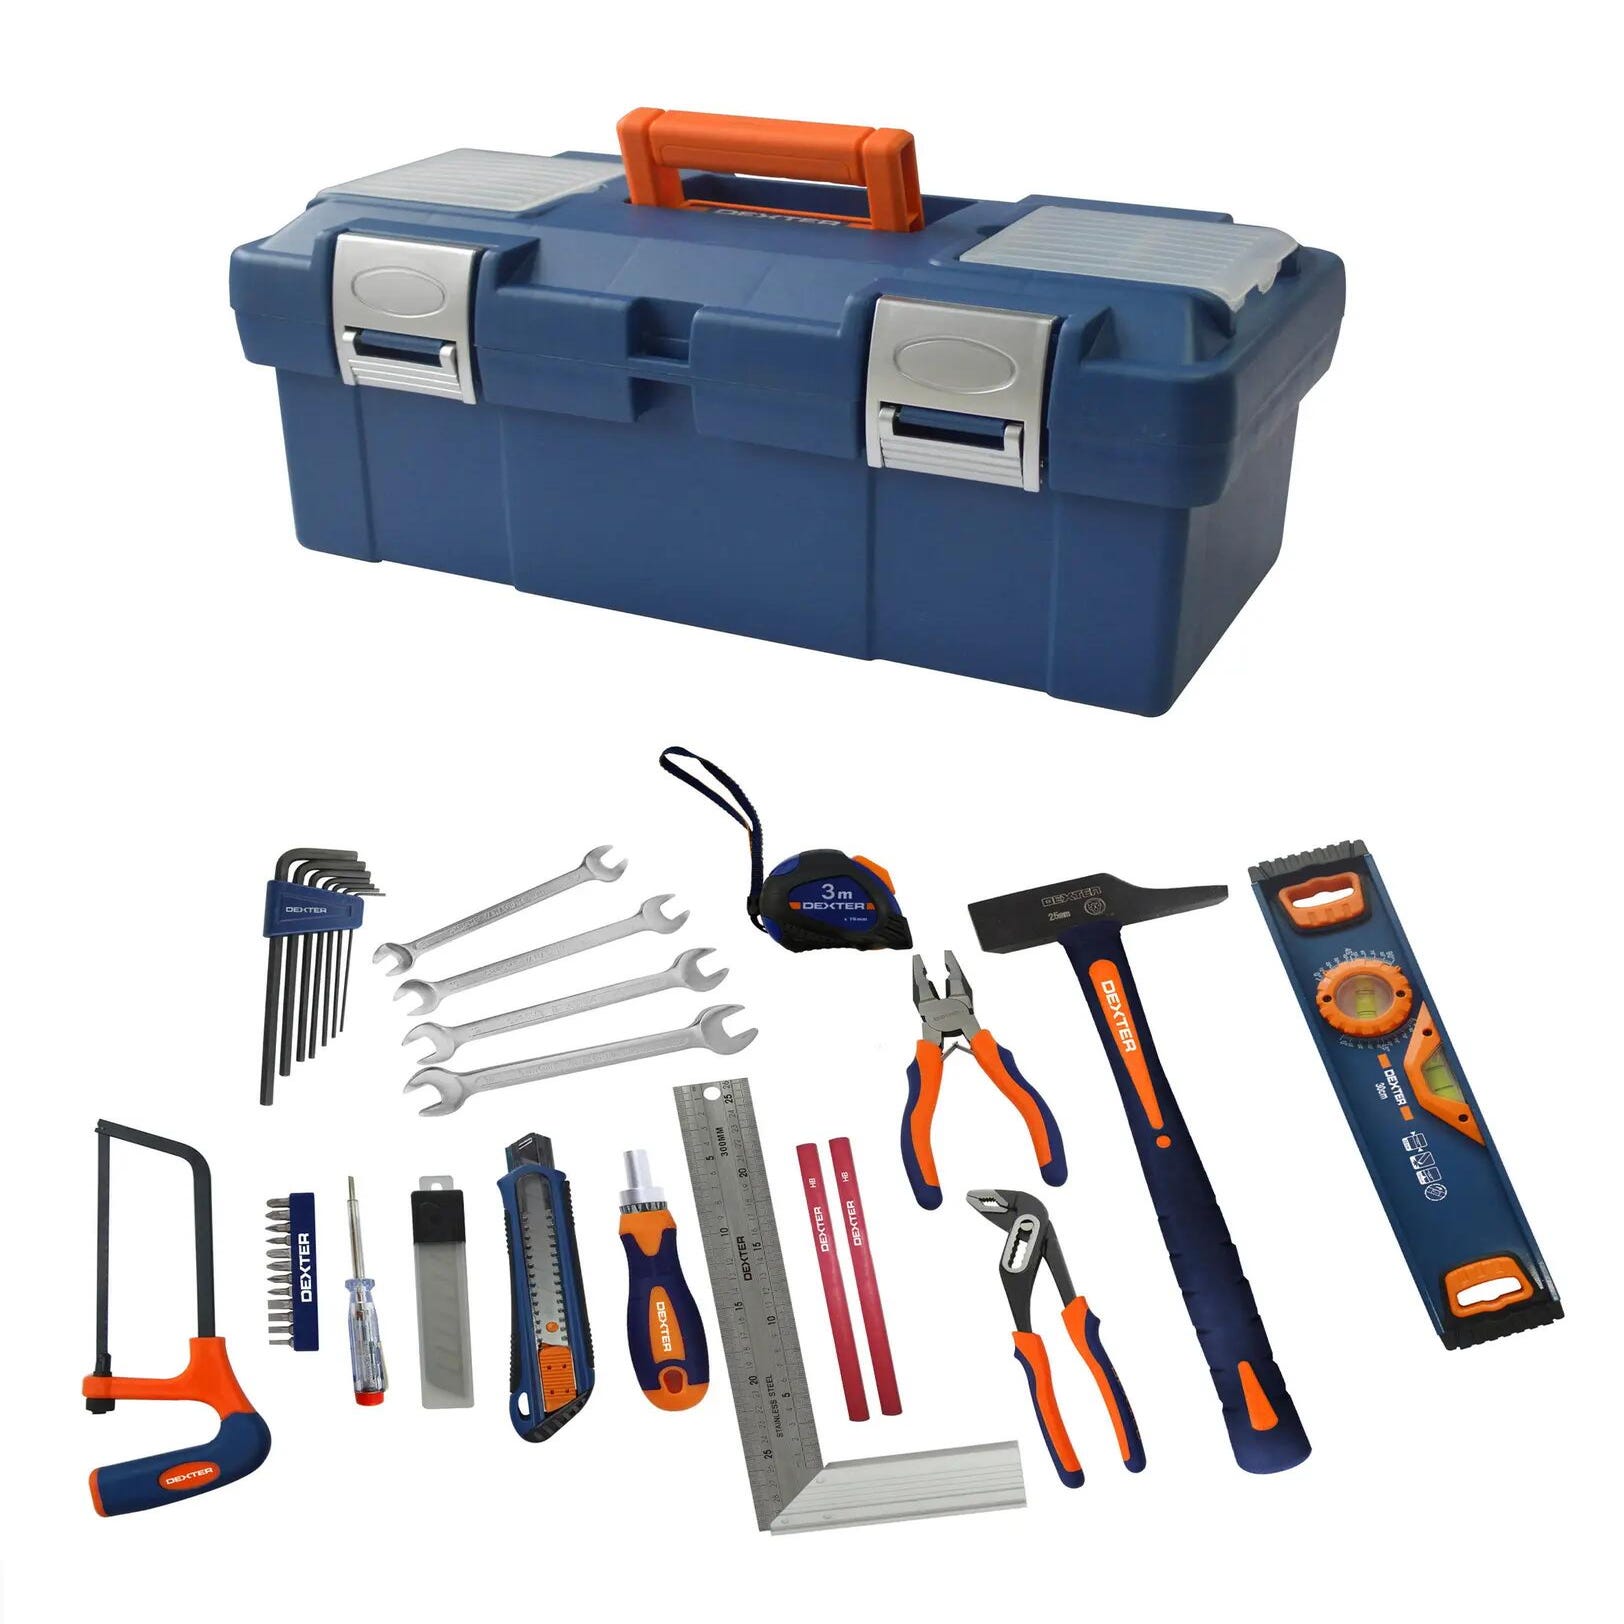 Outils tout usage Certified, 168 pièces